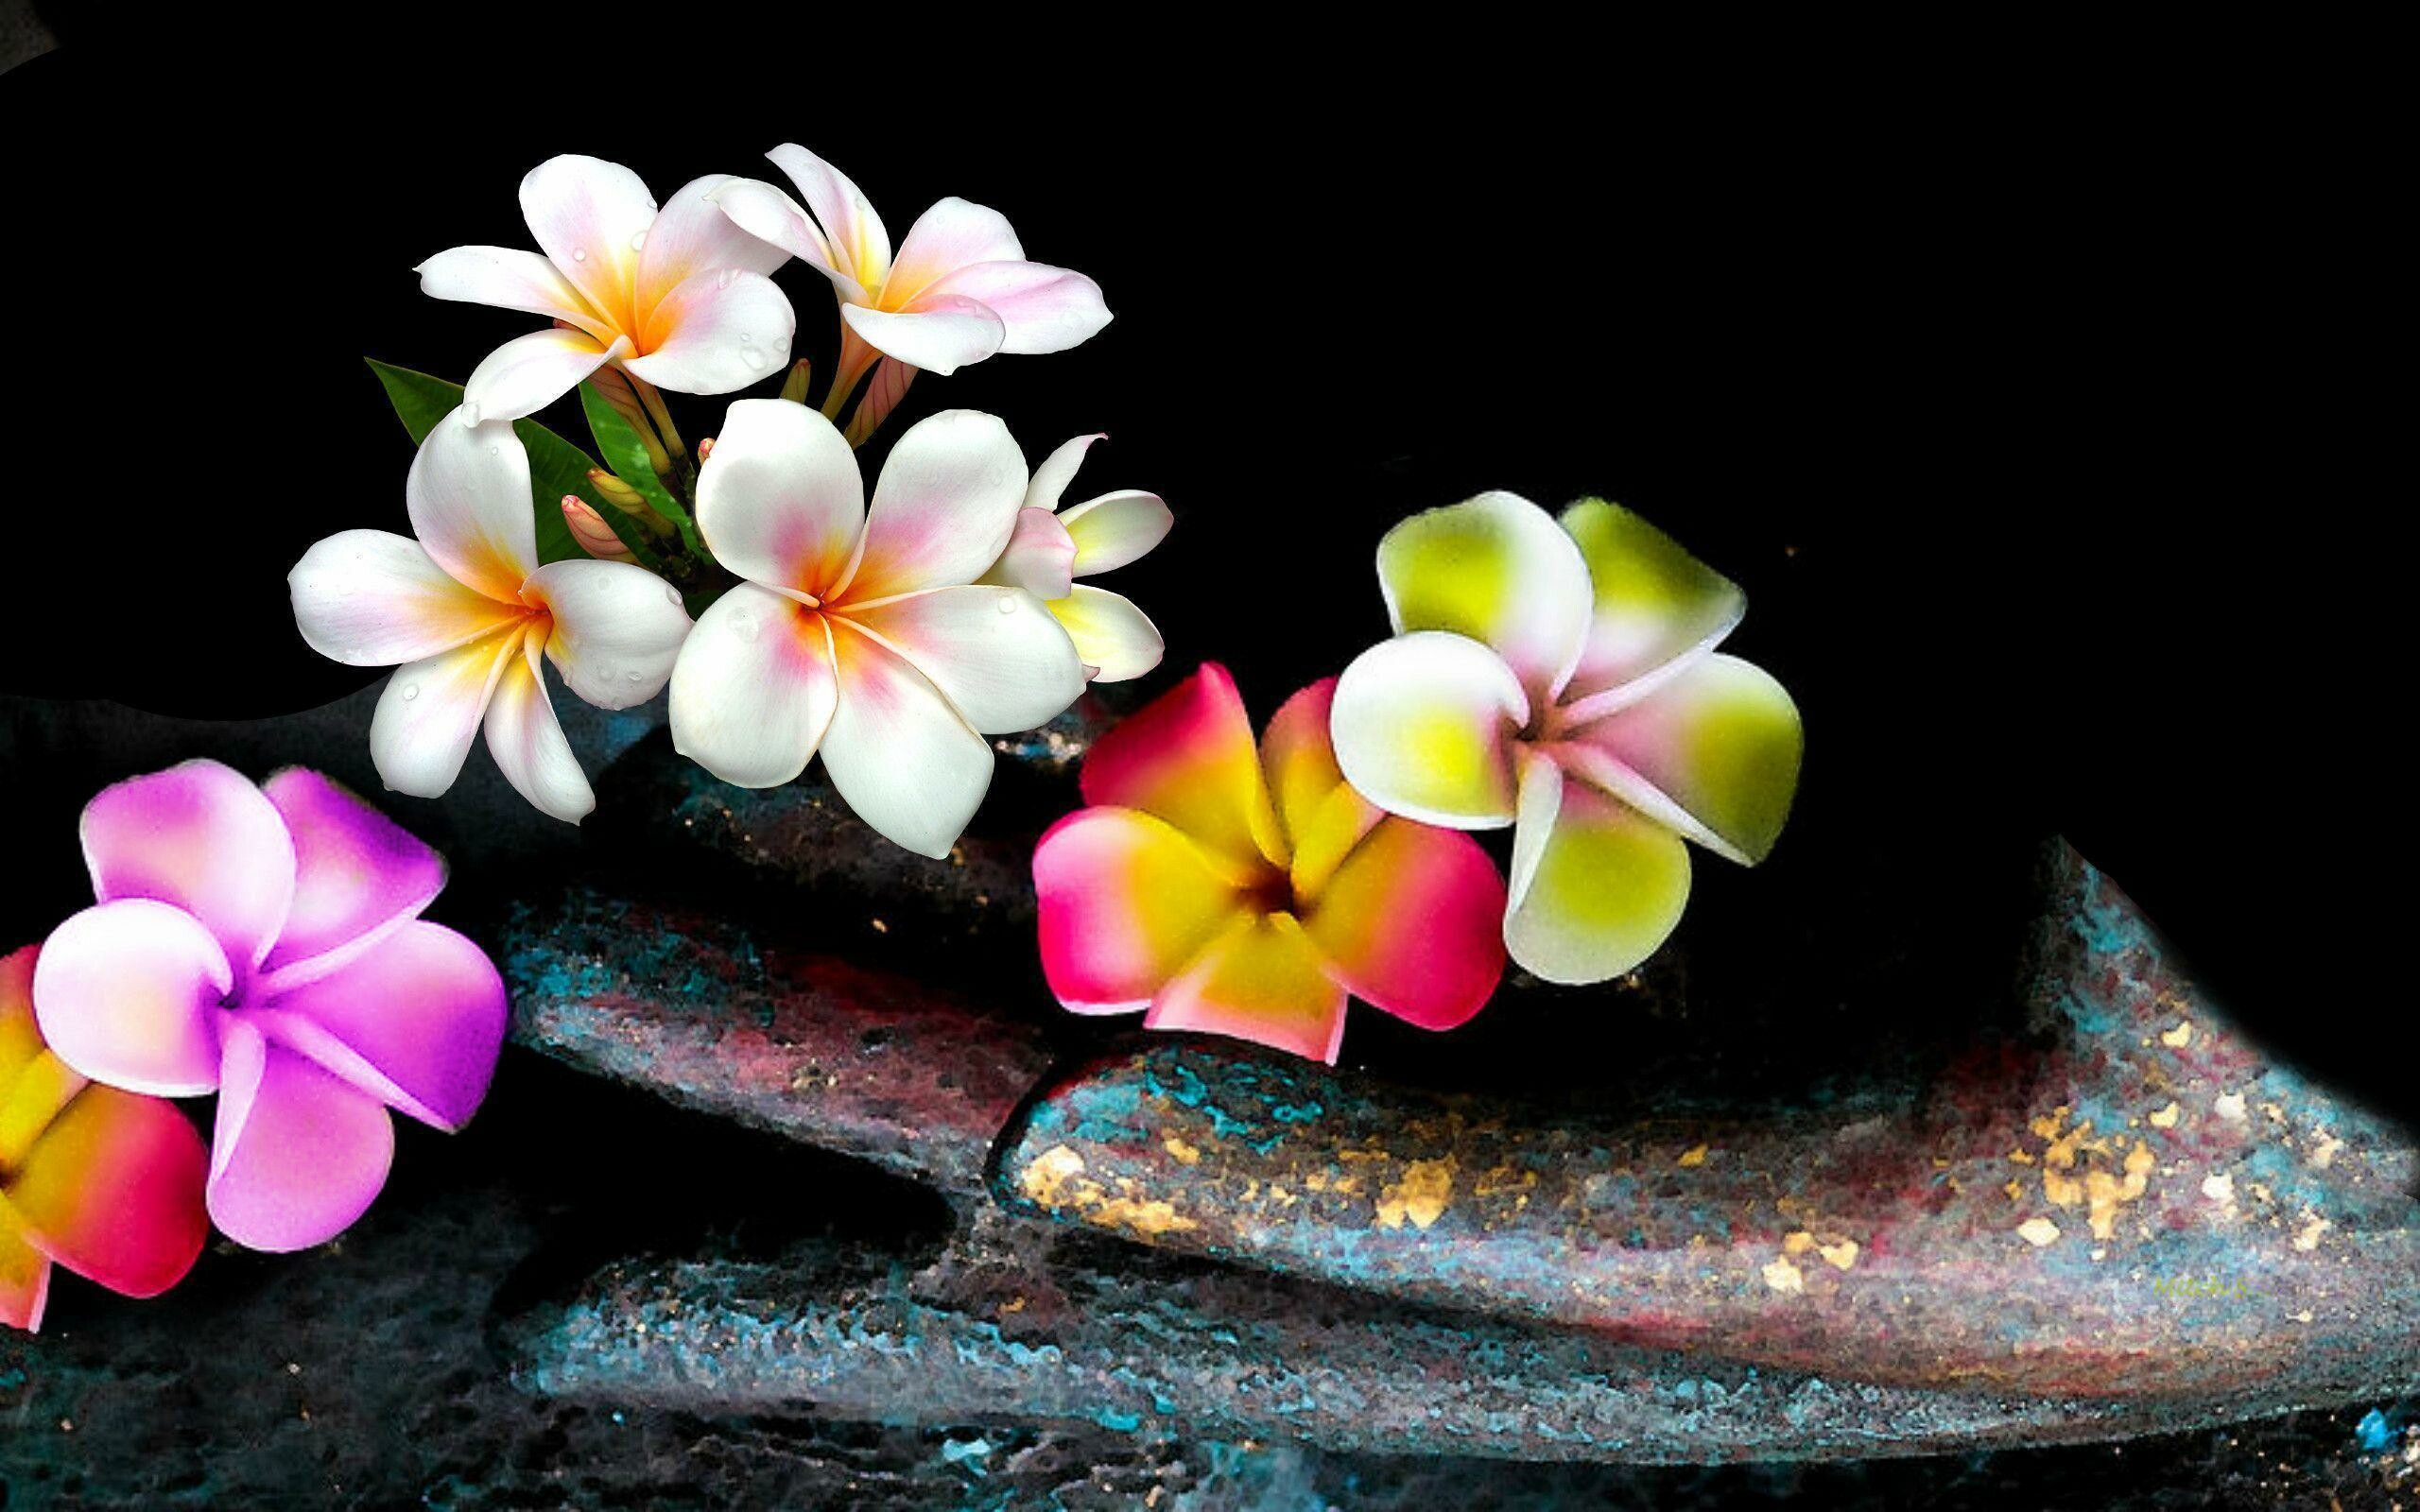 Frangipani Flower: A genus of about 12 species of deciduous shrubs or small trees in the Dogbane family. 2560x1600 HD Wallpaper.